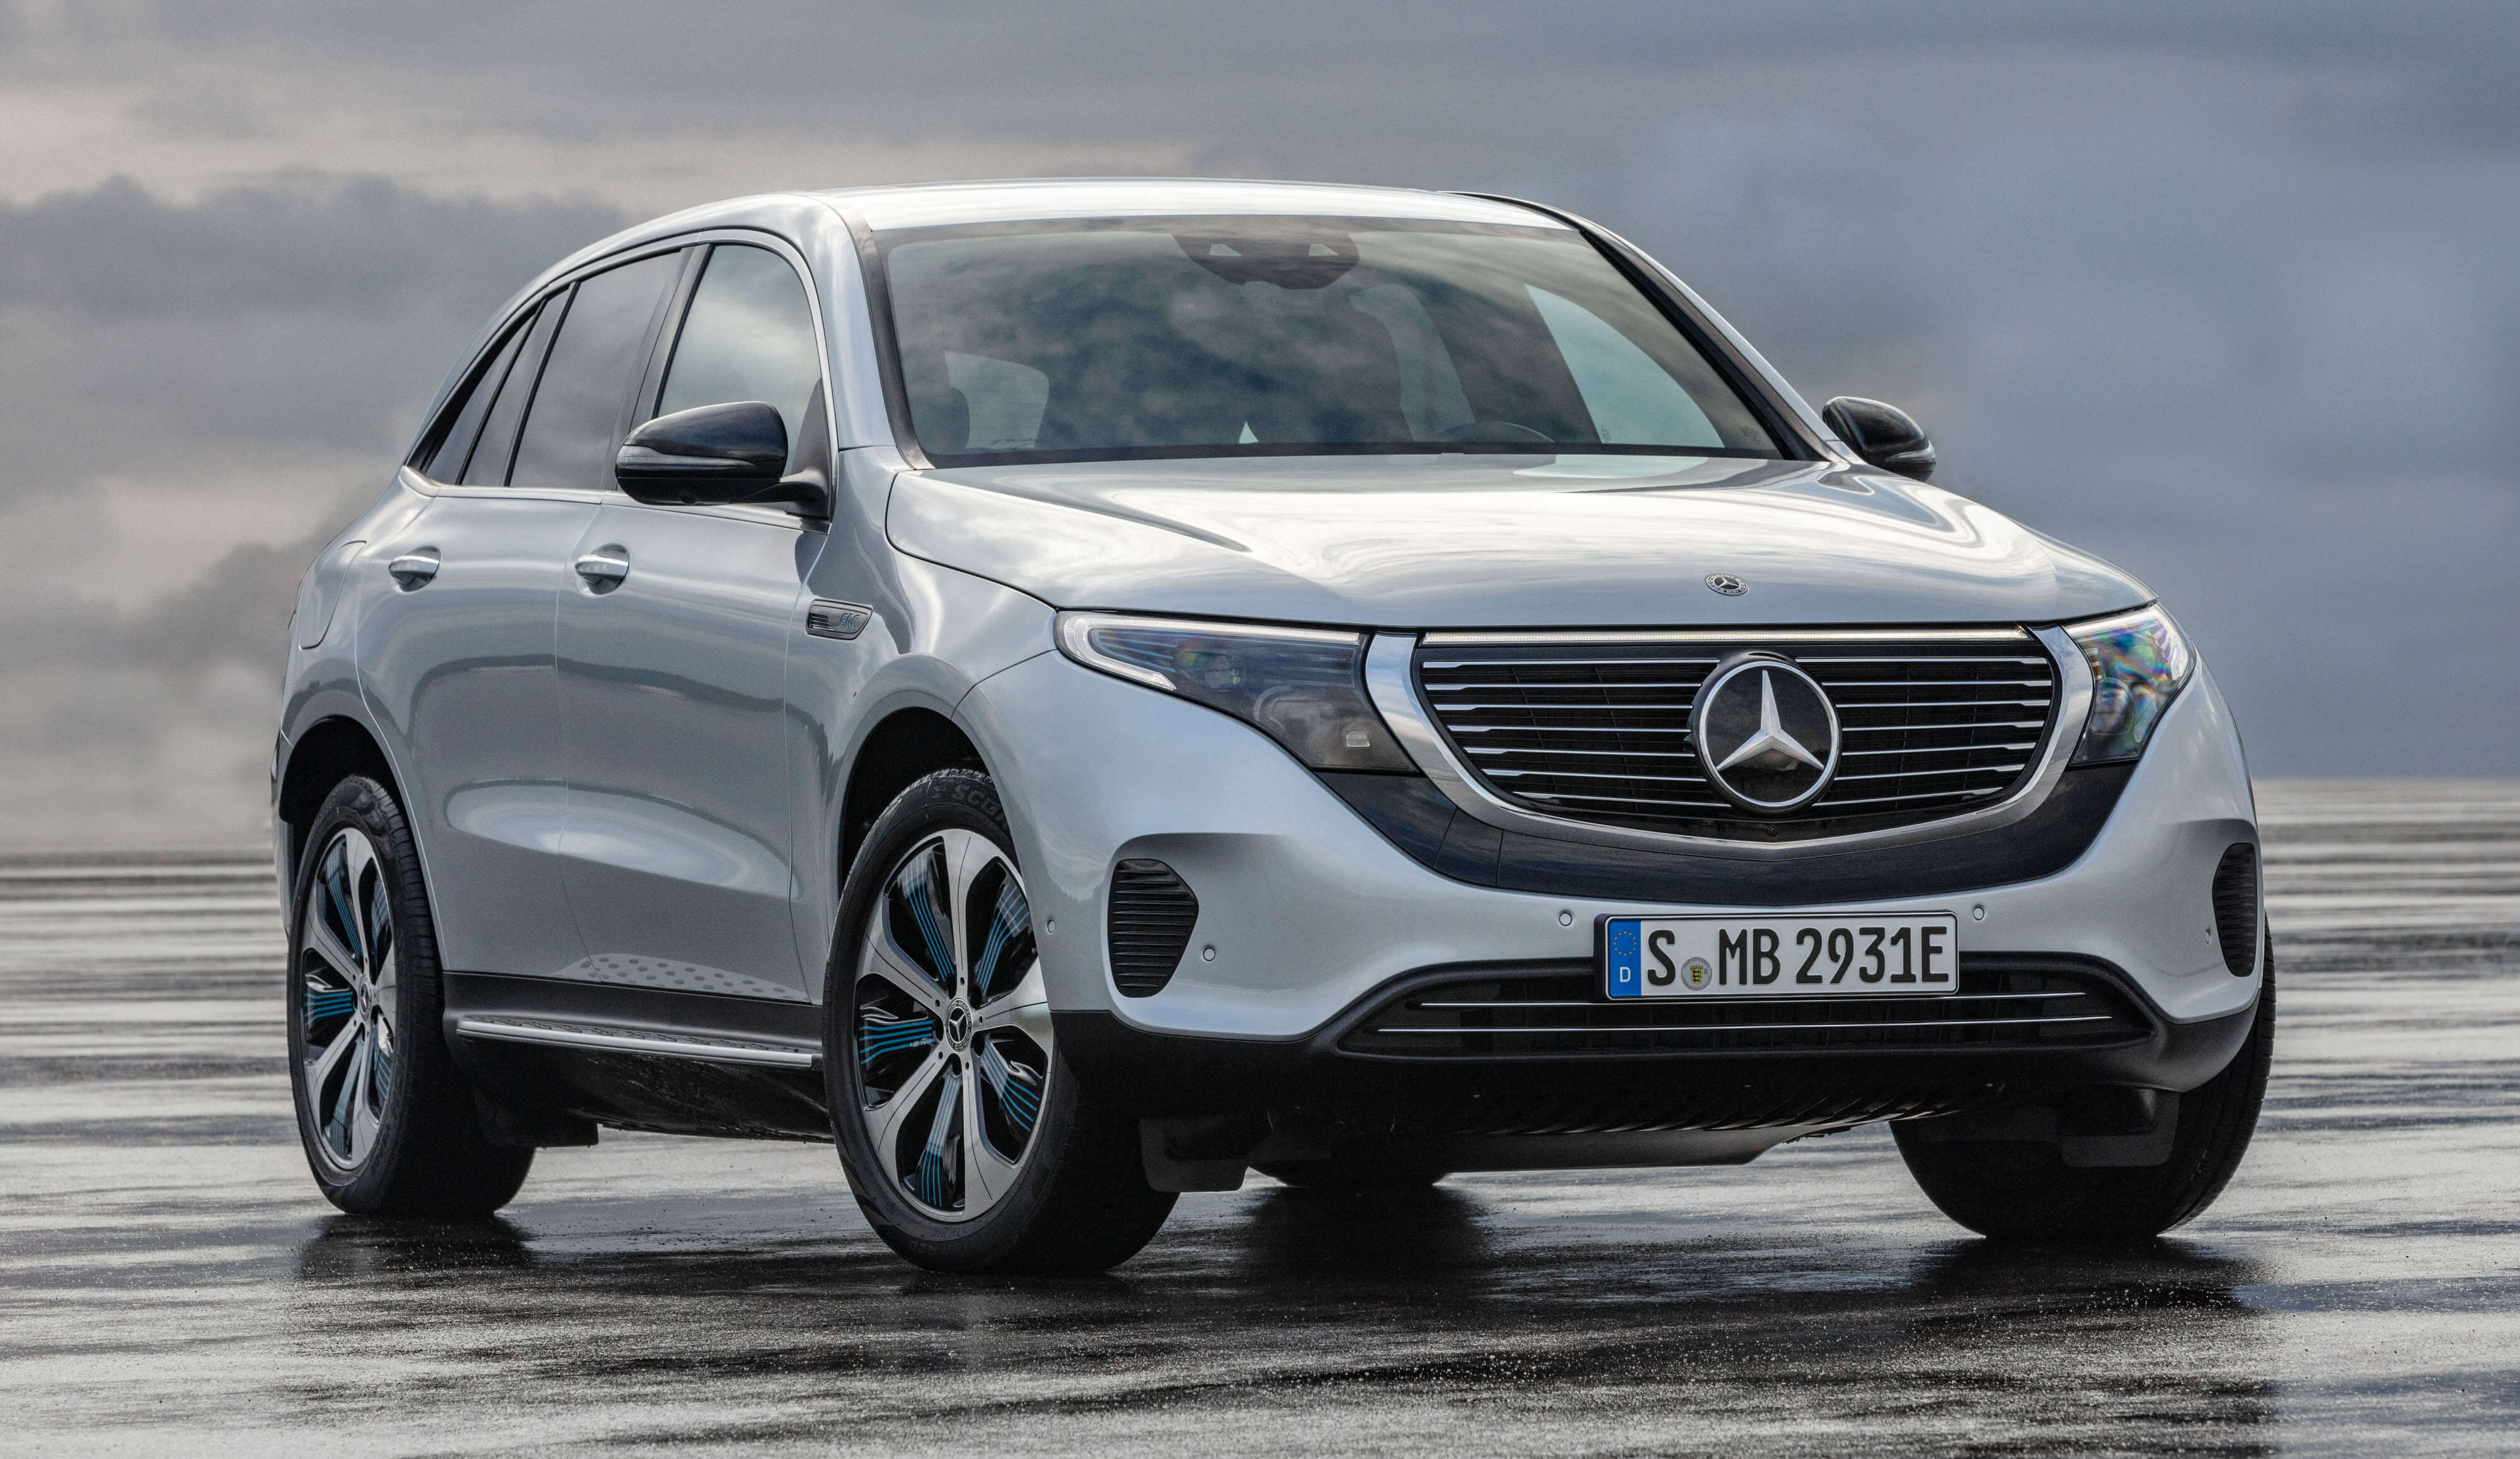 New Electric Mercedes-Benz EQ C SUV for Launch